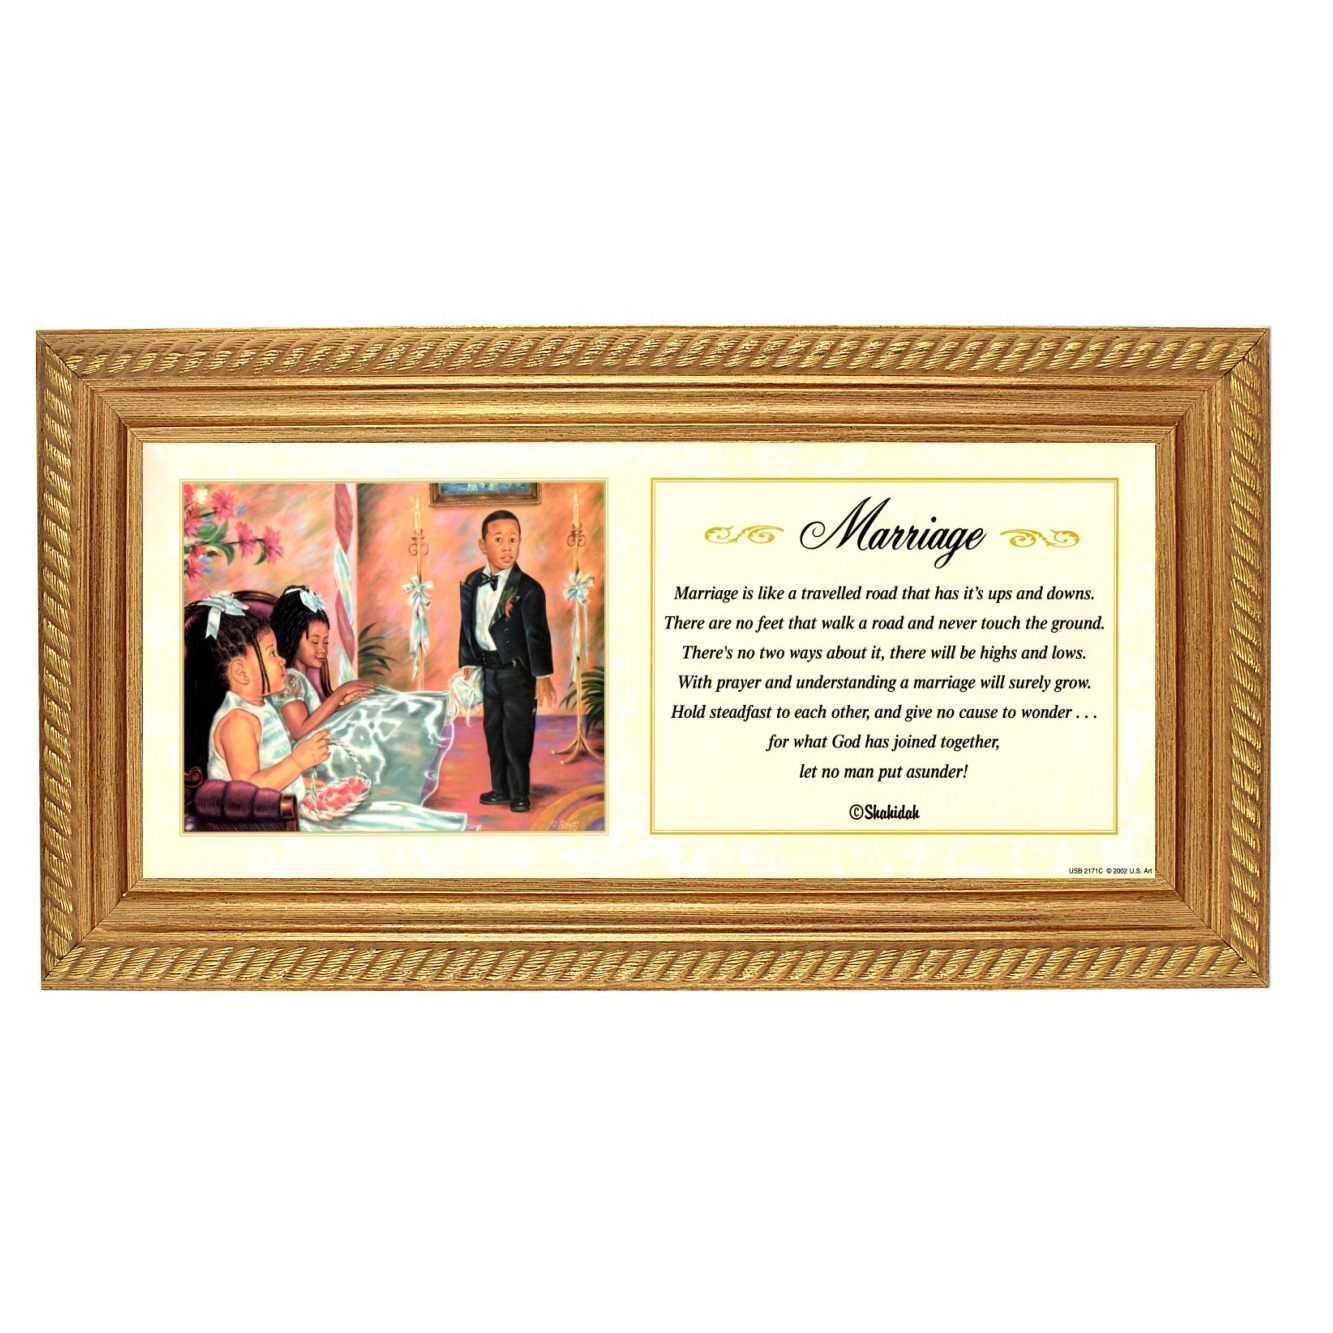 2 of 2: Marriage-Literary Art-Shahidah-8x20 inches-Gold Frame-The Black Art Depot